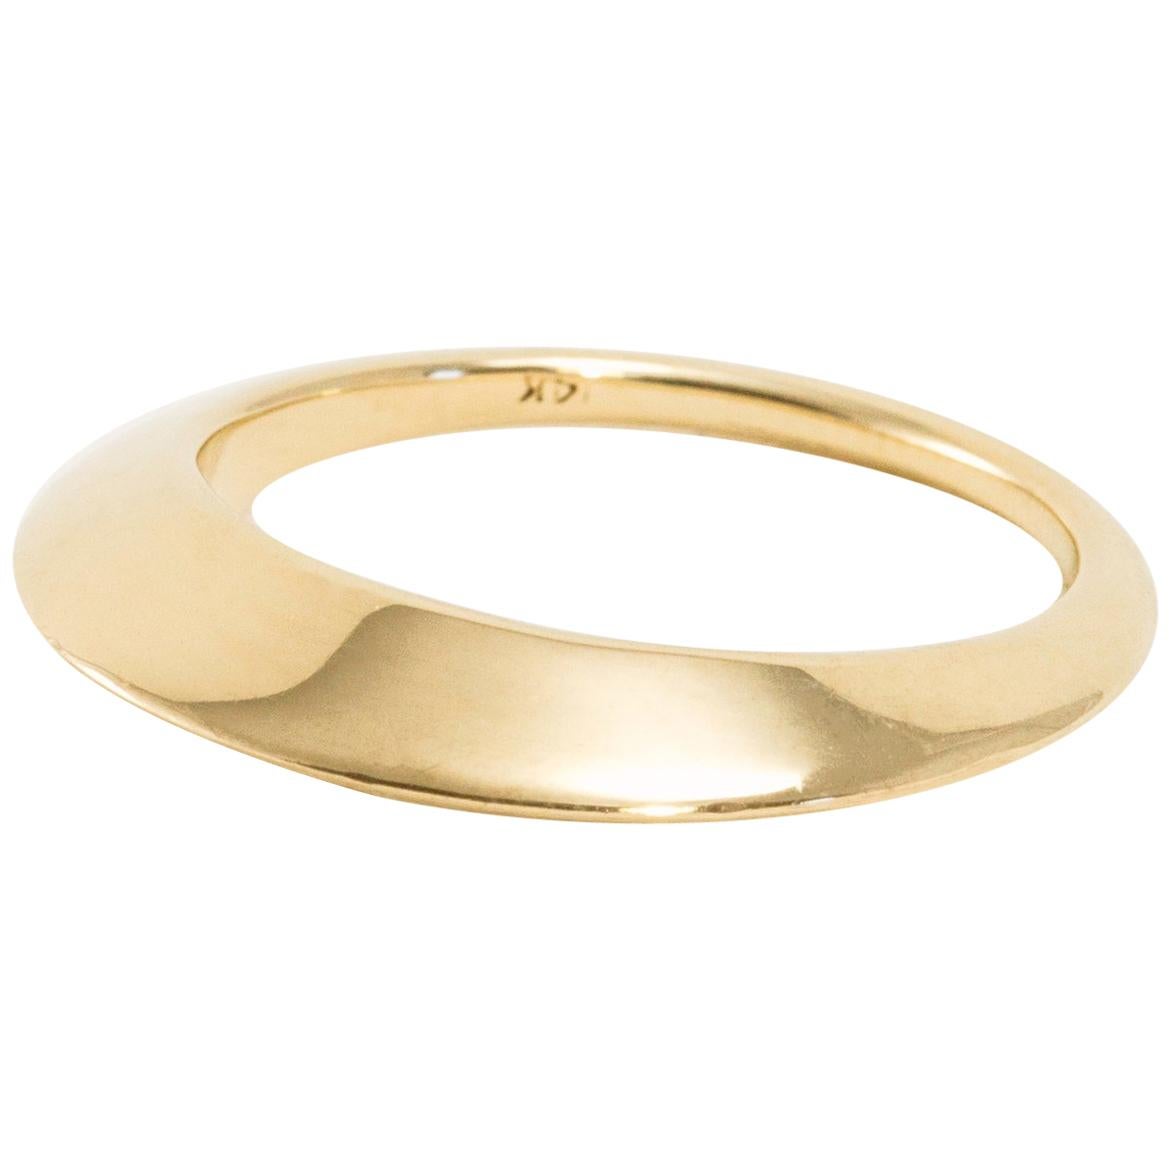 Solid Gold Triangle Ring Revolution